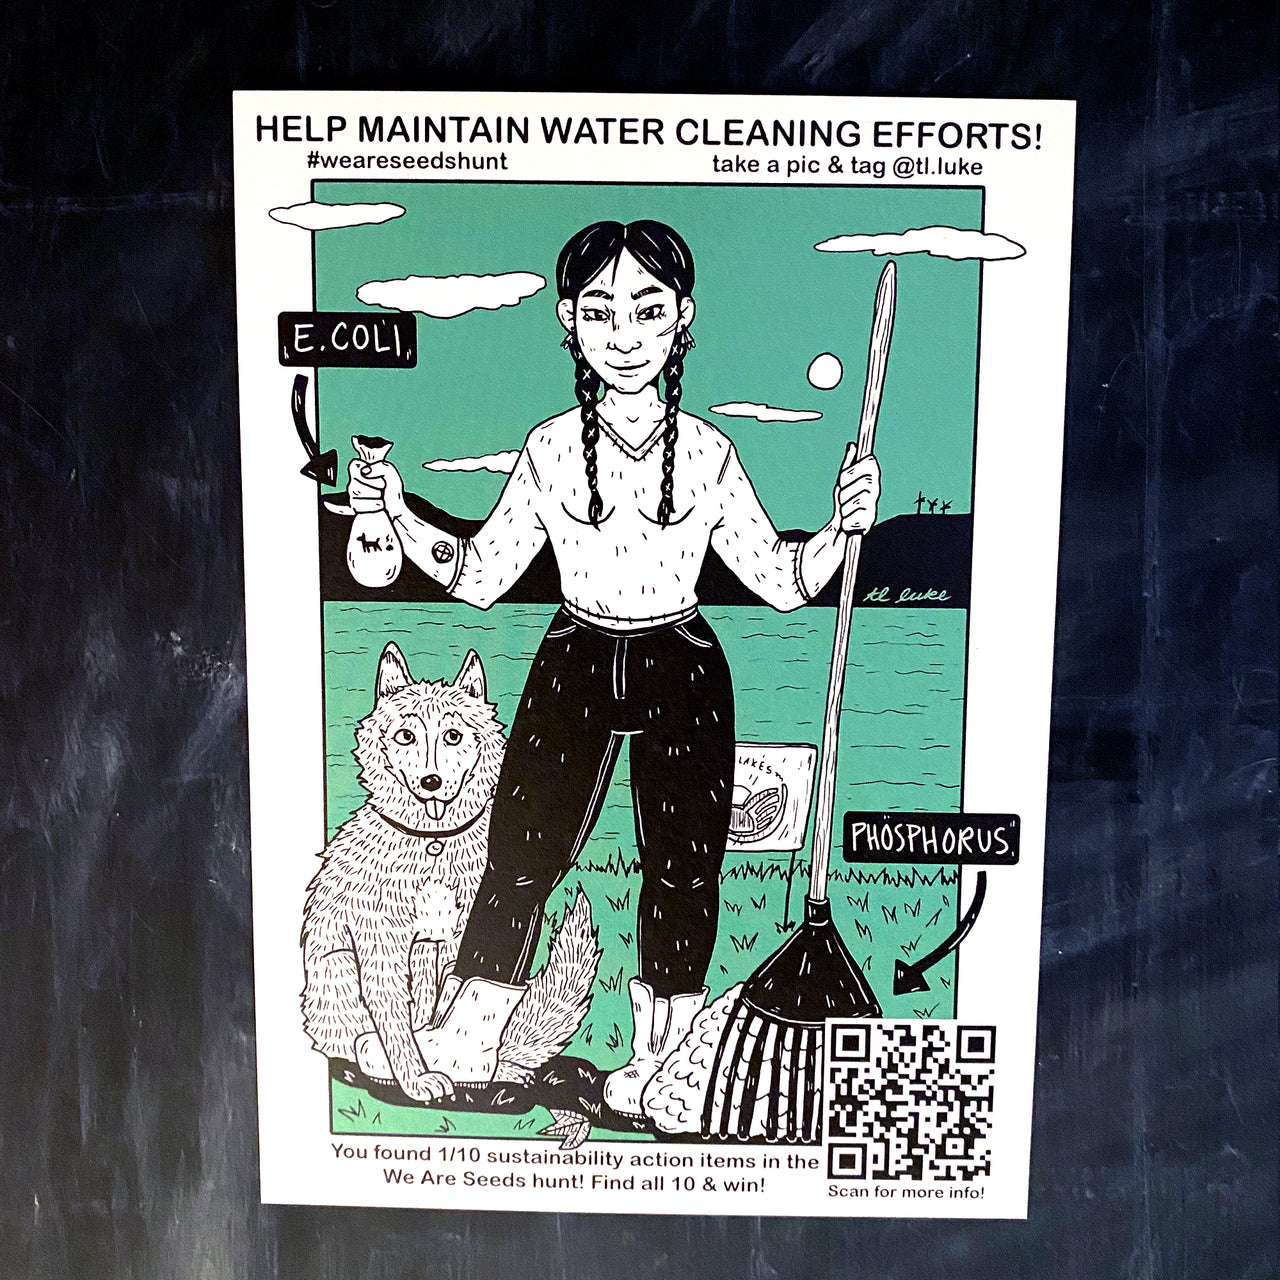 WAS: Water Cleaning Postcard